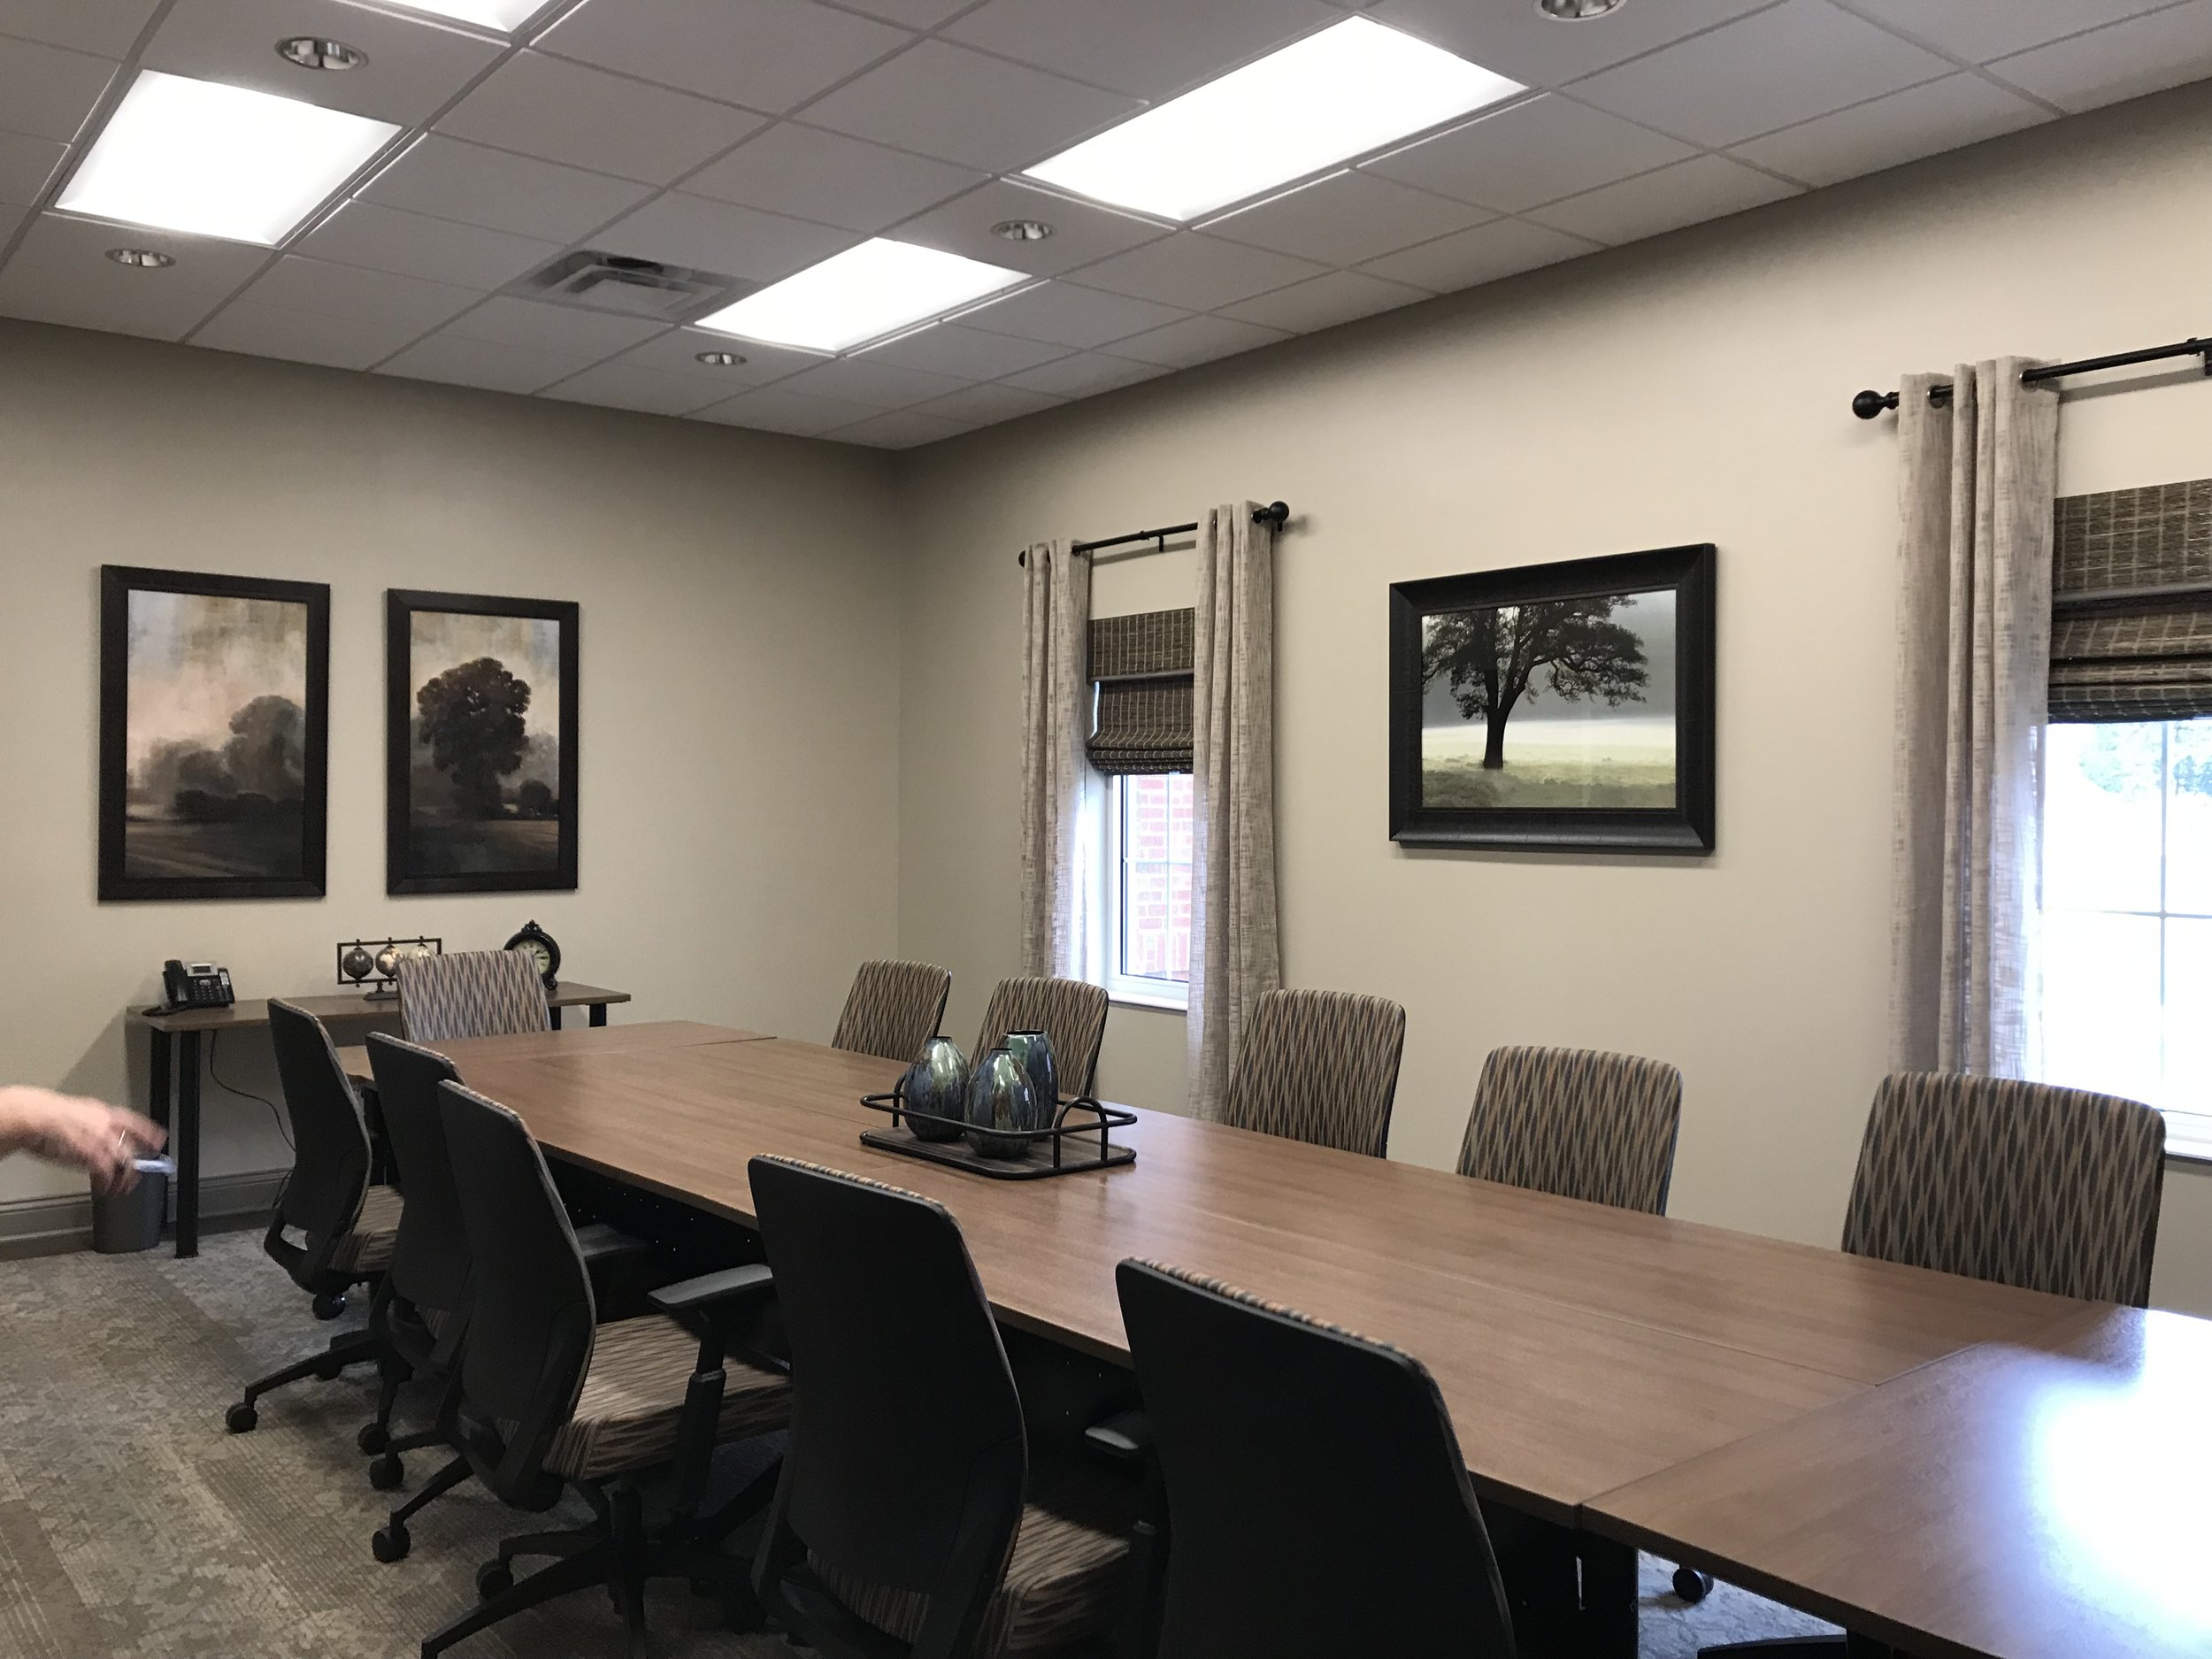  Addition - Conference Room 